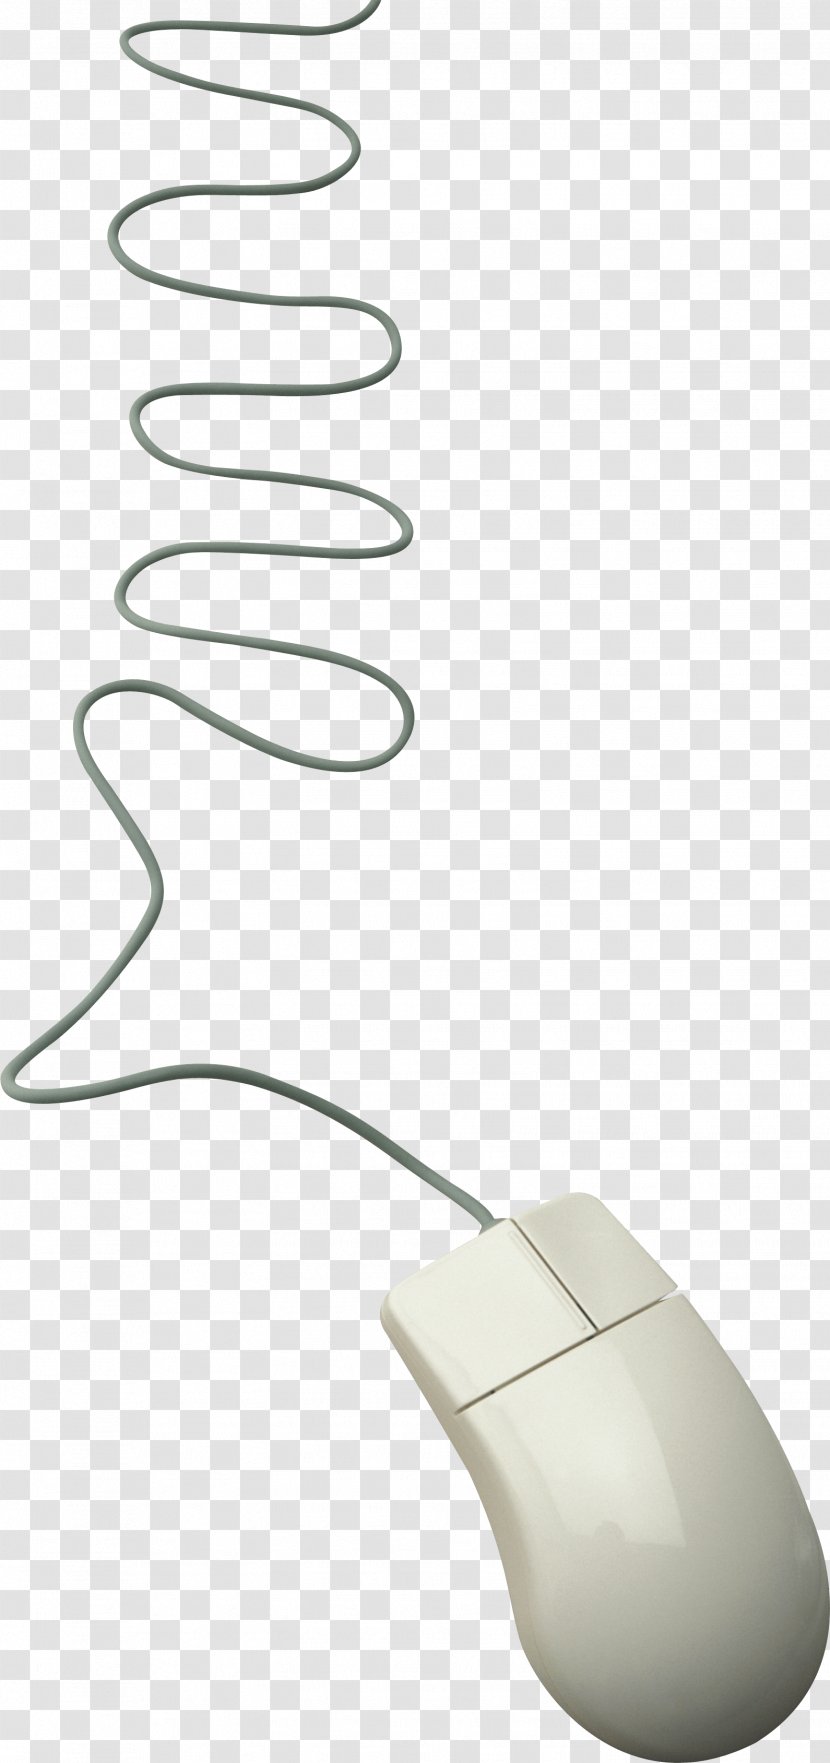 Computer Mouse Download - Text - White Image Transparent PNG